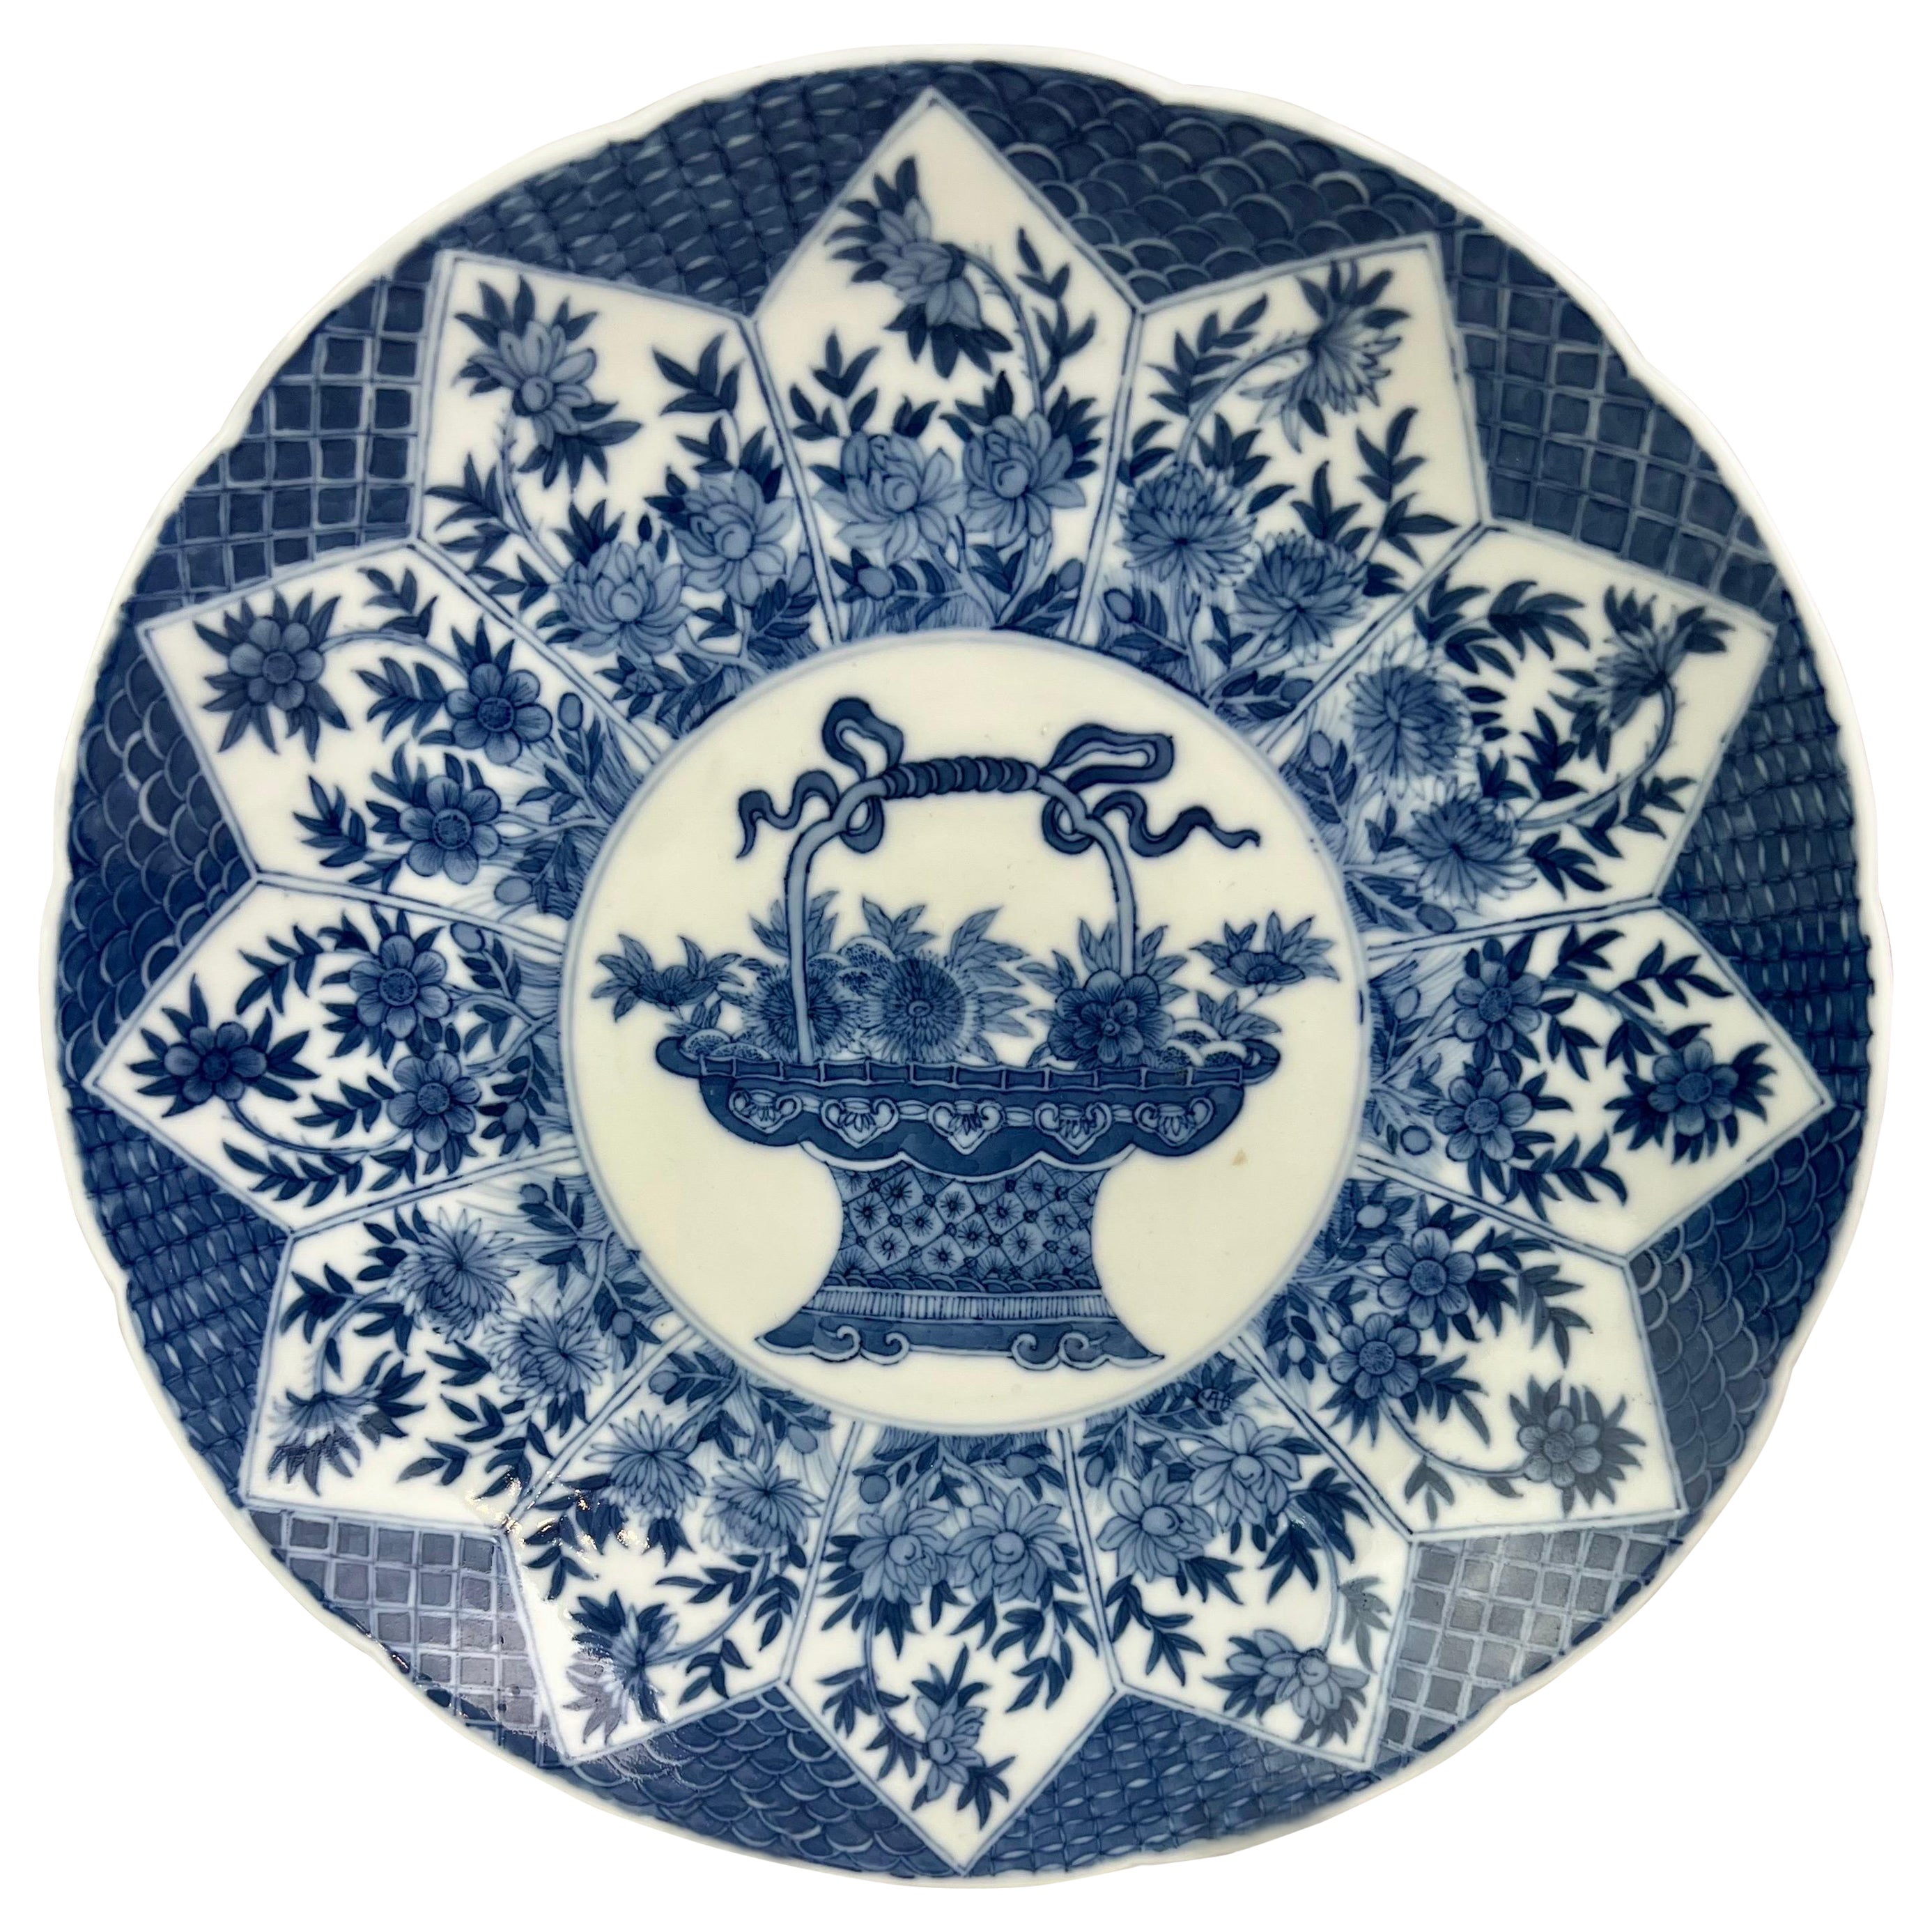 19th Century Chinese Export Blue and White Platter